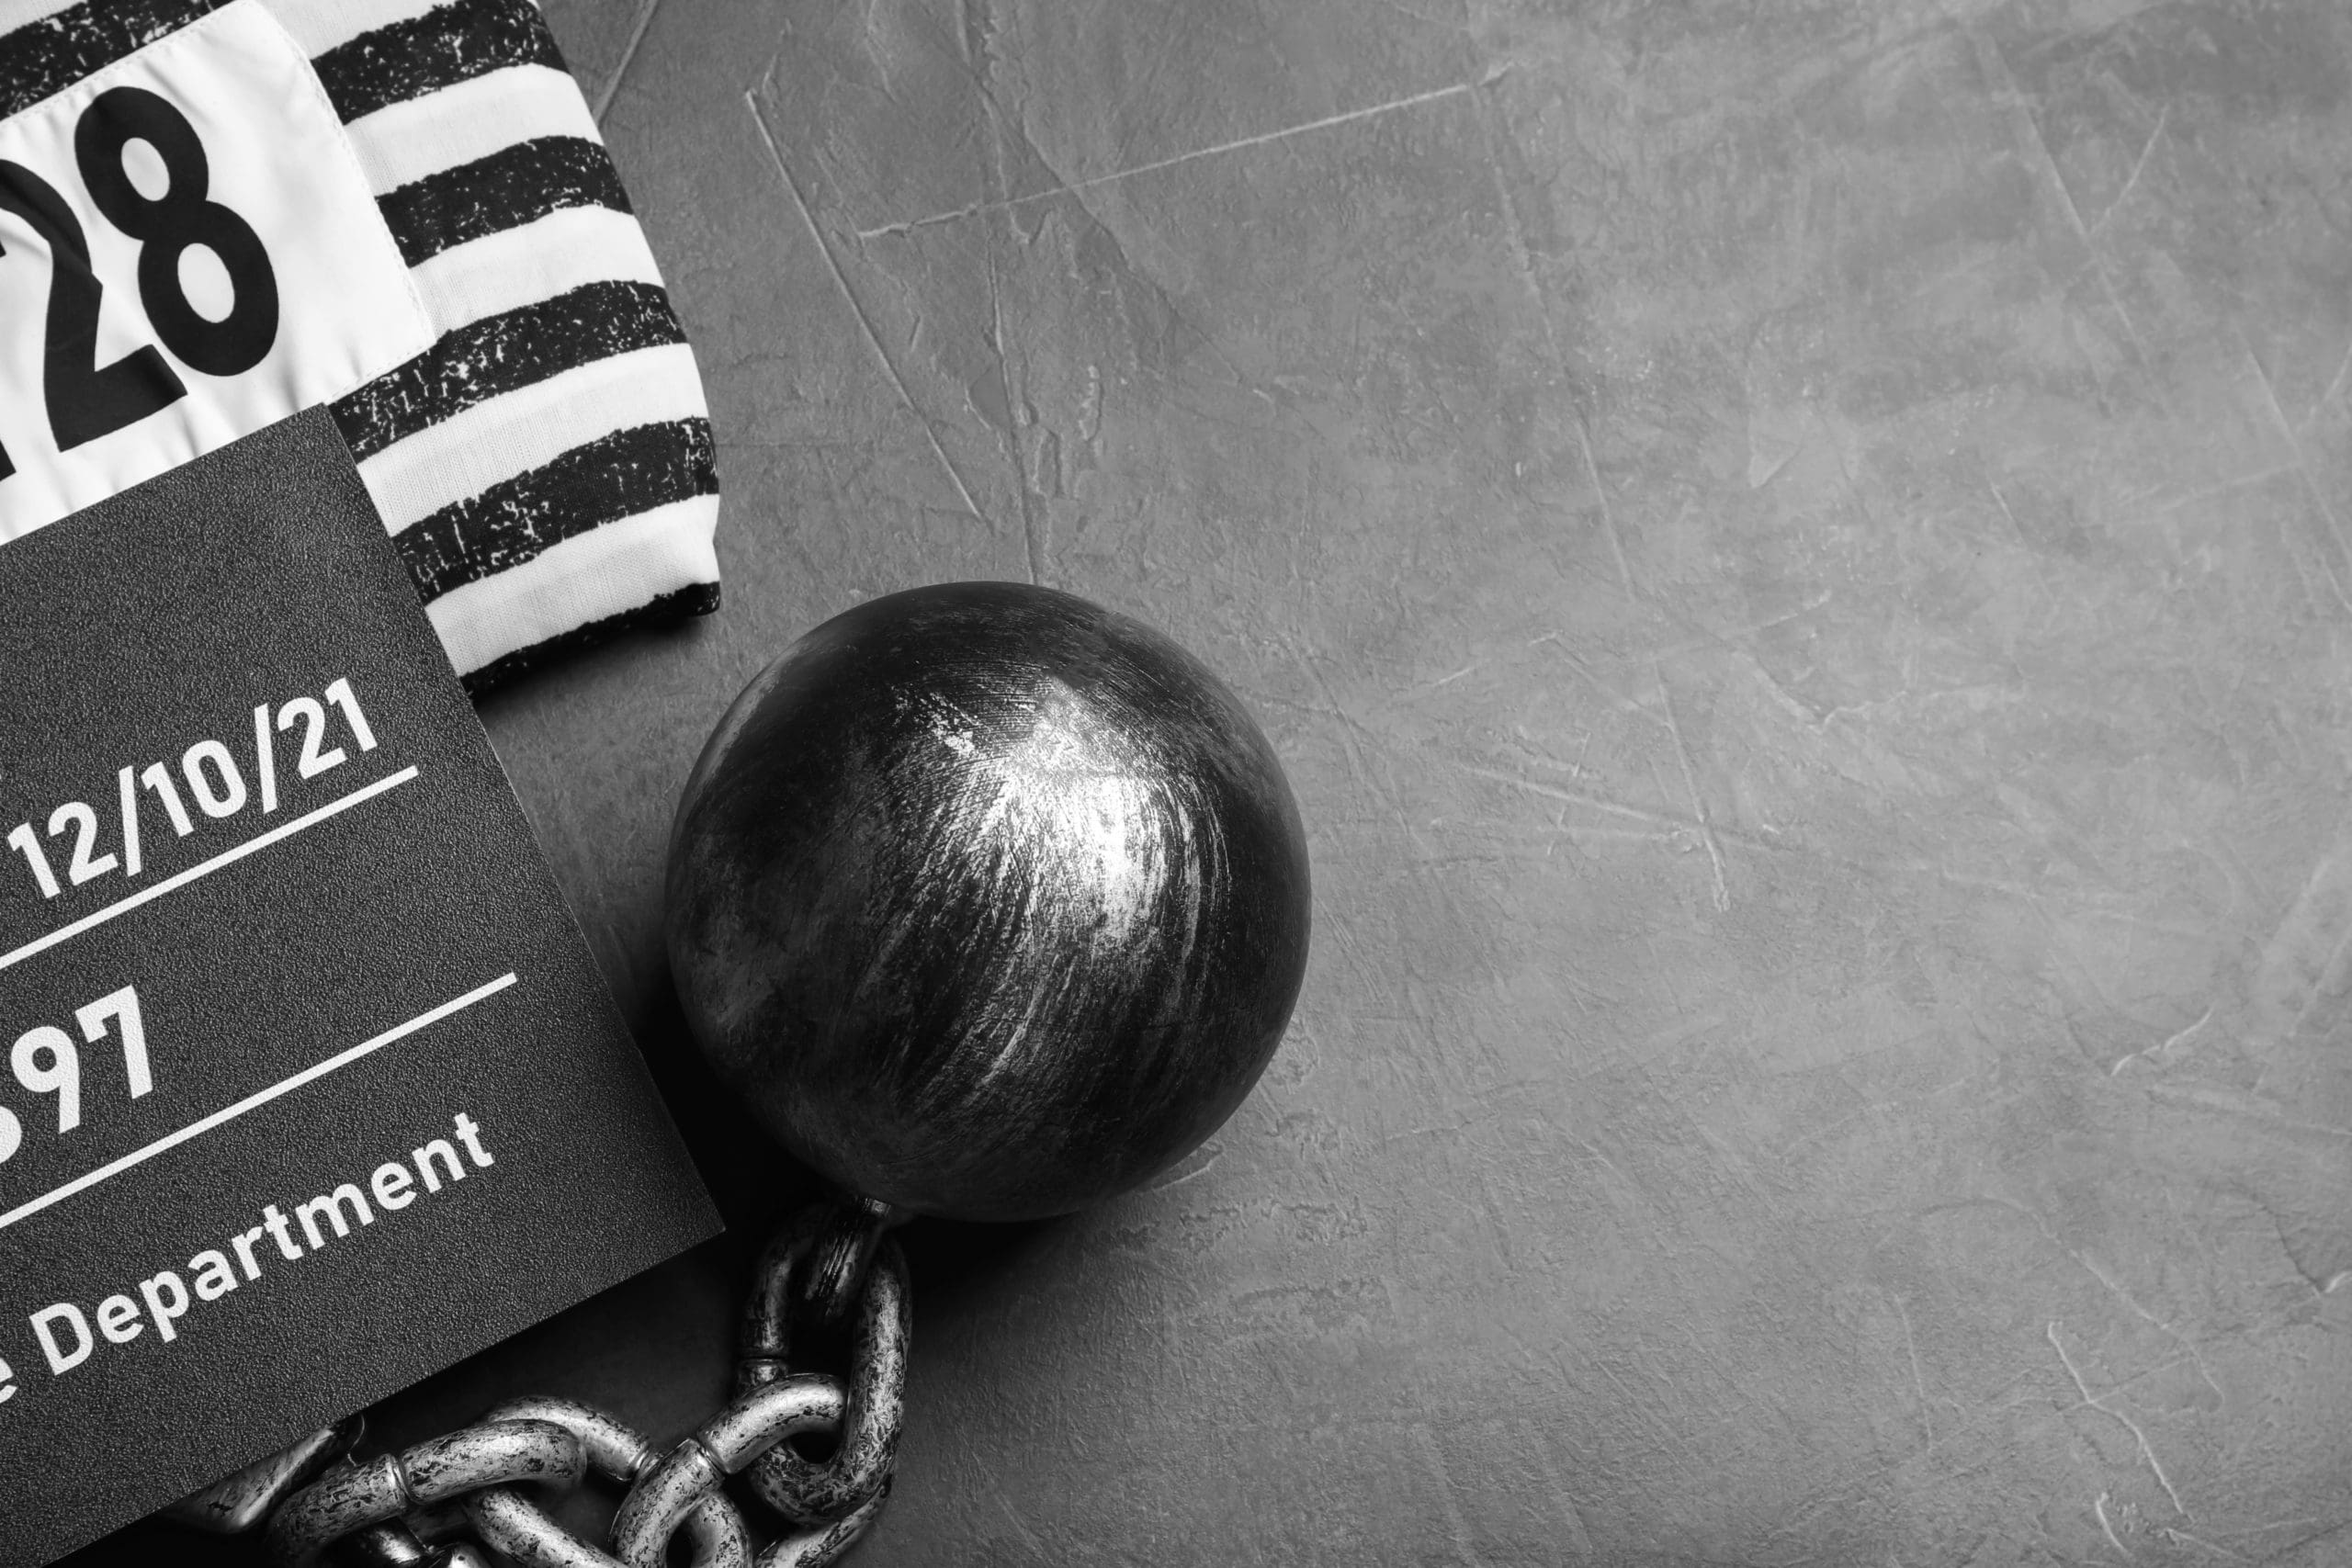 Monochrome image depicting a vintage convict theme with striped prisoner uniform, a ball and chain, and a booking date card.